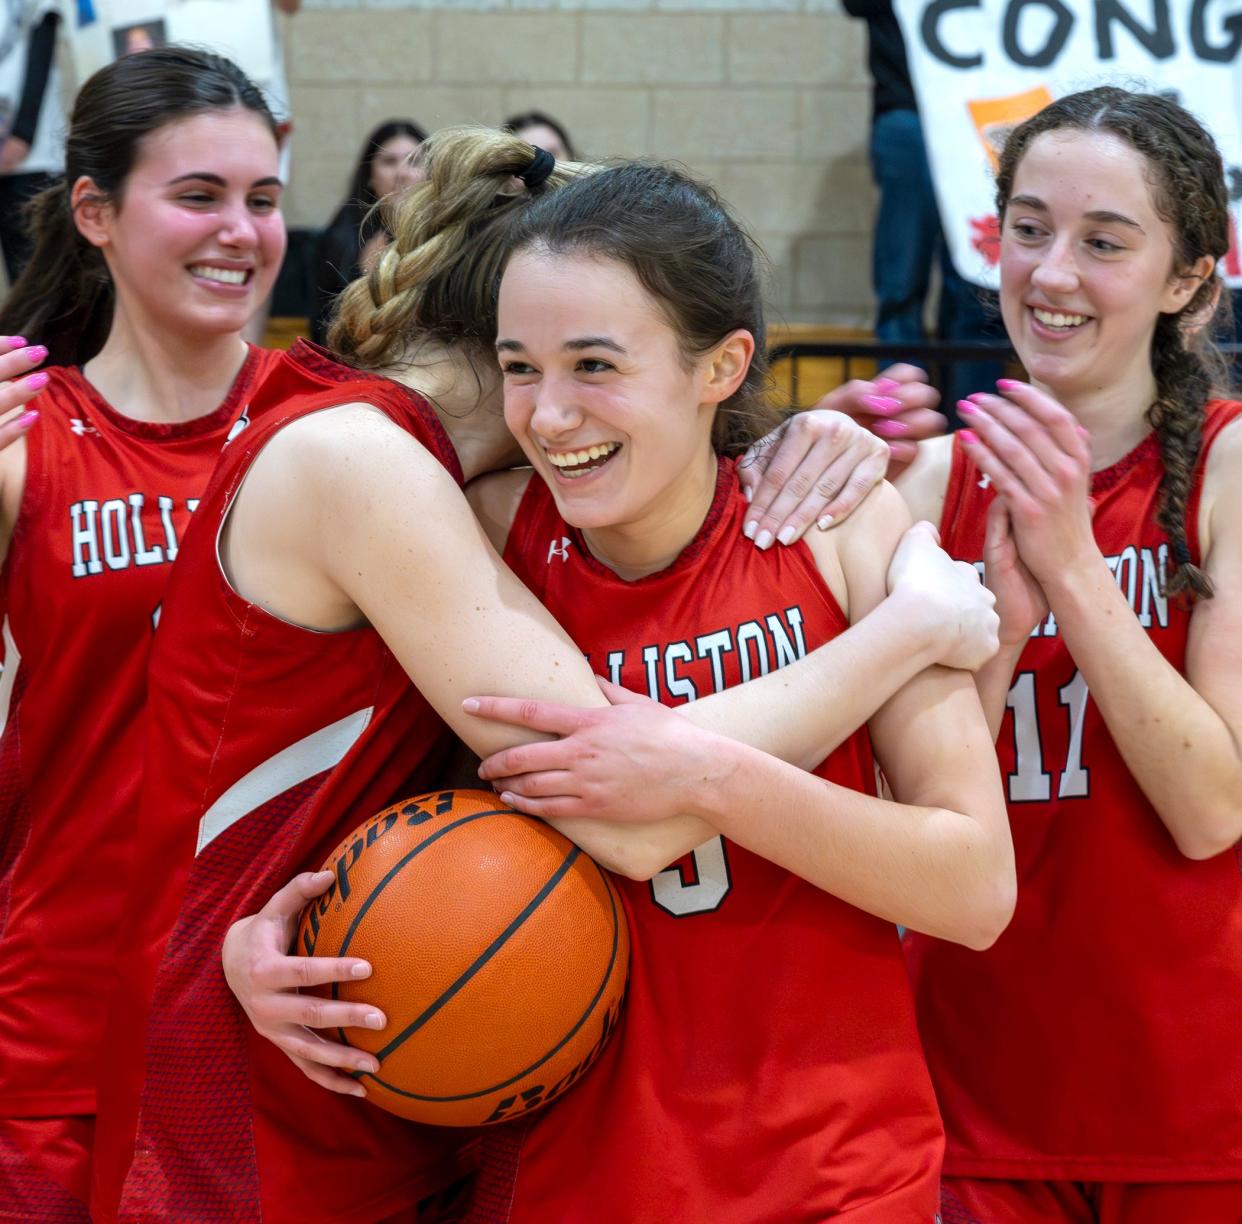 Holliston junior Megan Simpson celebrates scoring her 1,000th career point with her teammates against Norwood on Tuesday in Norwood.